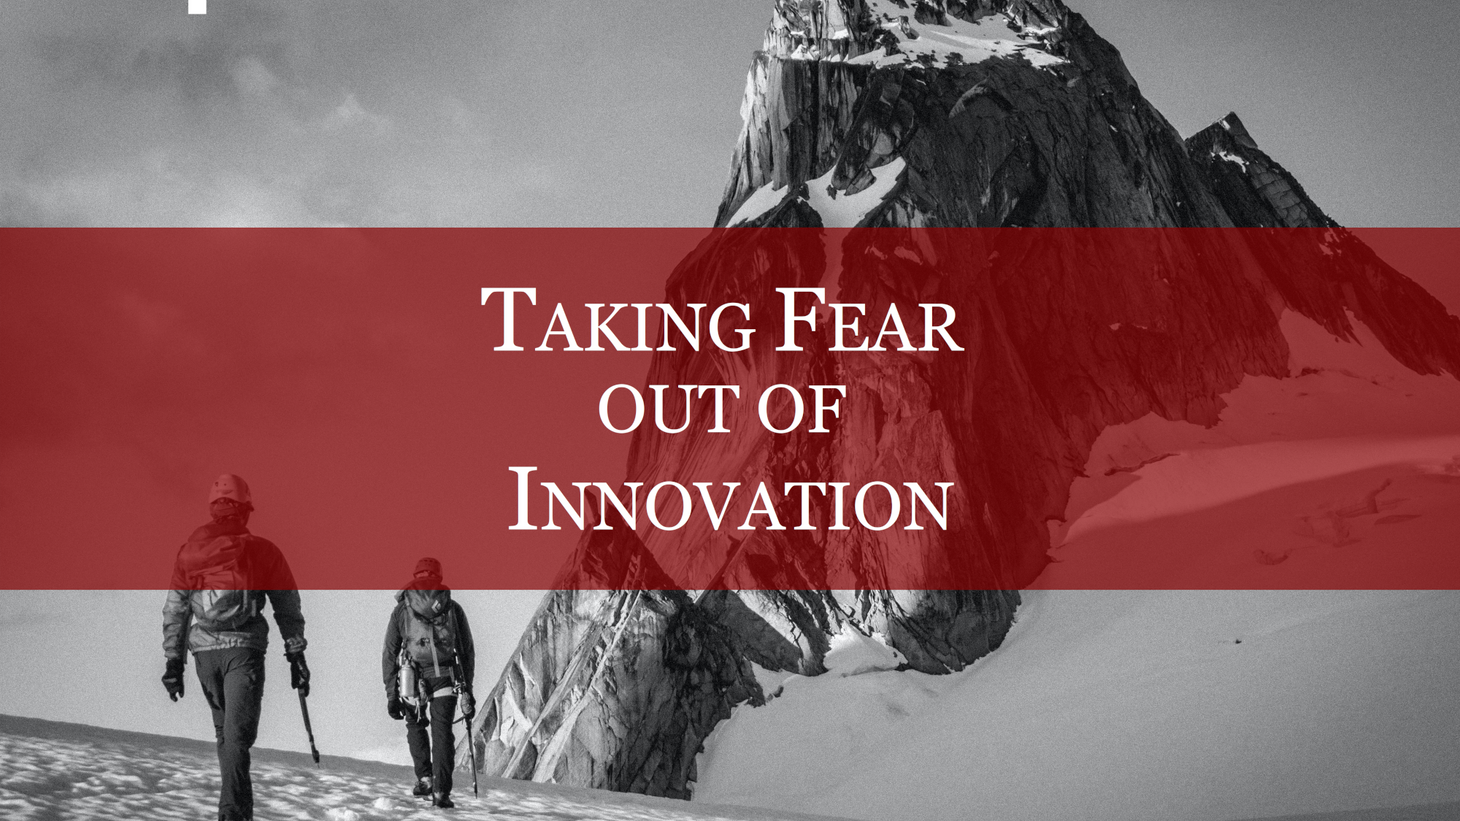 Taking fear out of innovation